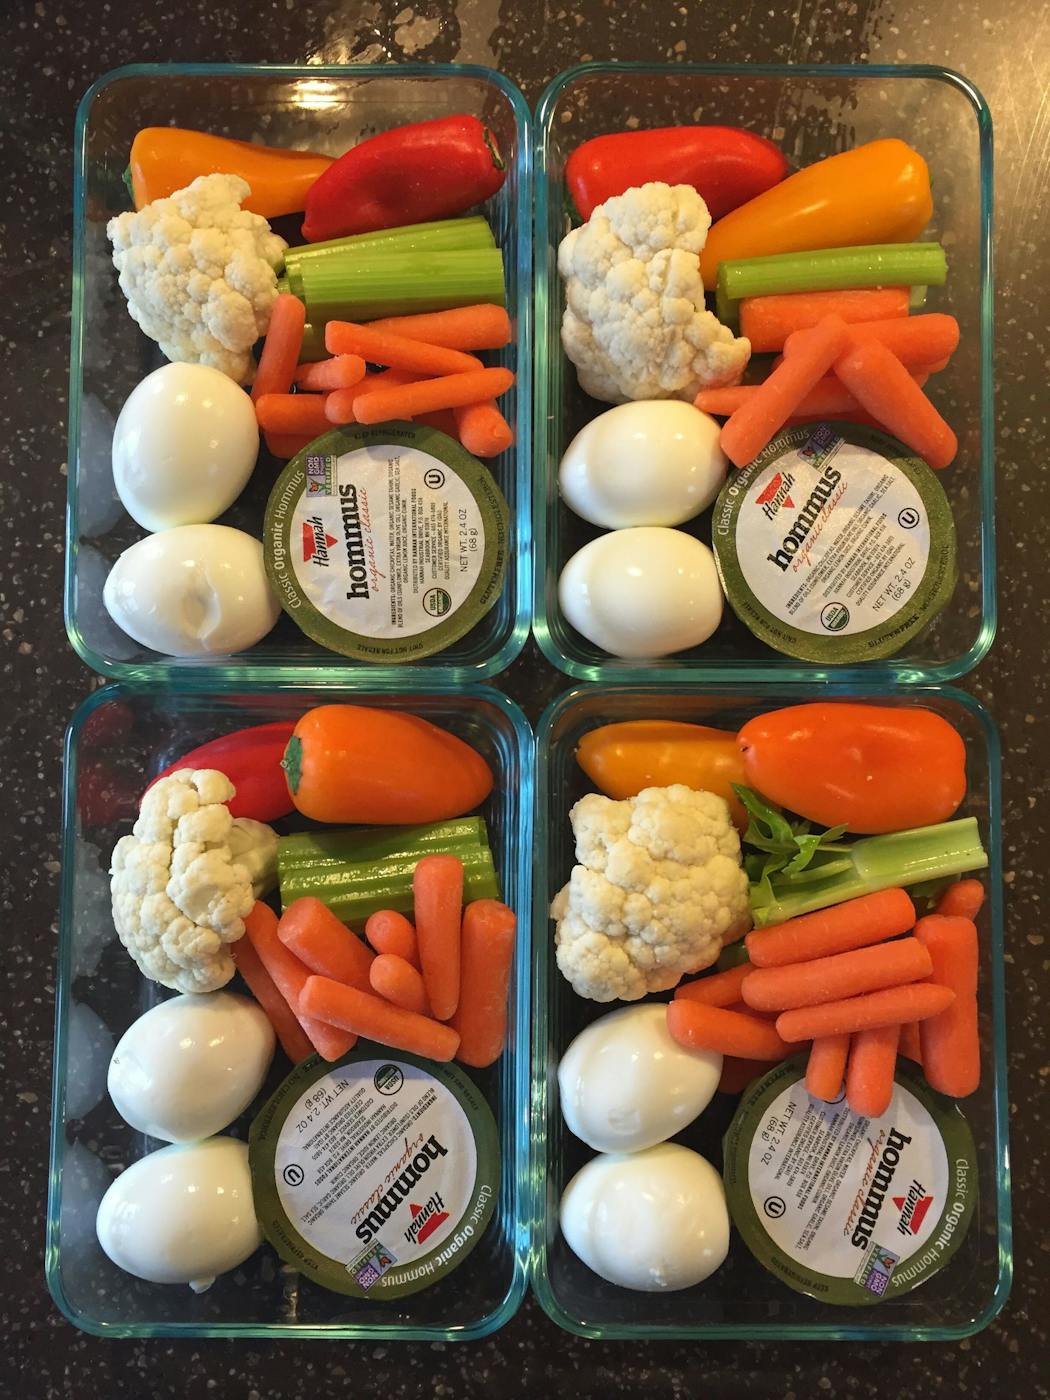 Professional organizer and chef Joor Erin stores healthy snack plates in uniform-sized rectangular glass containers.